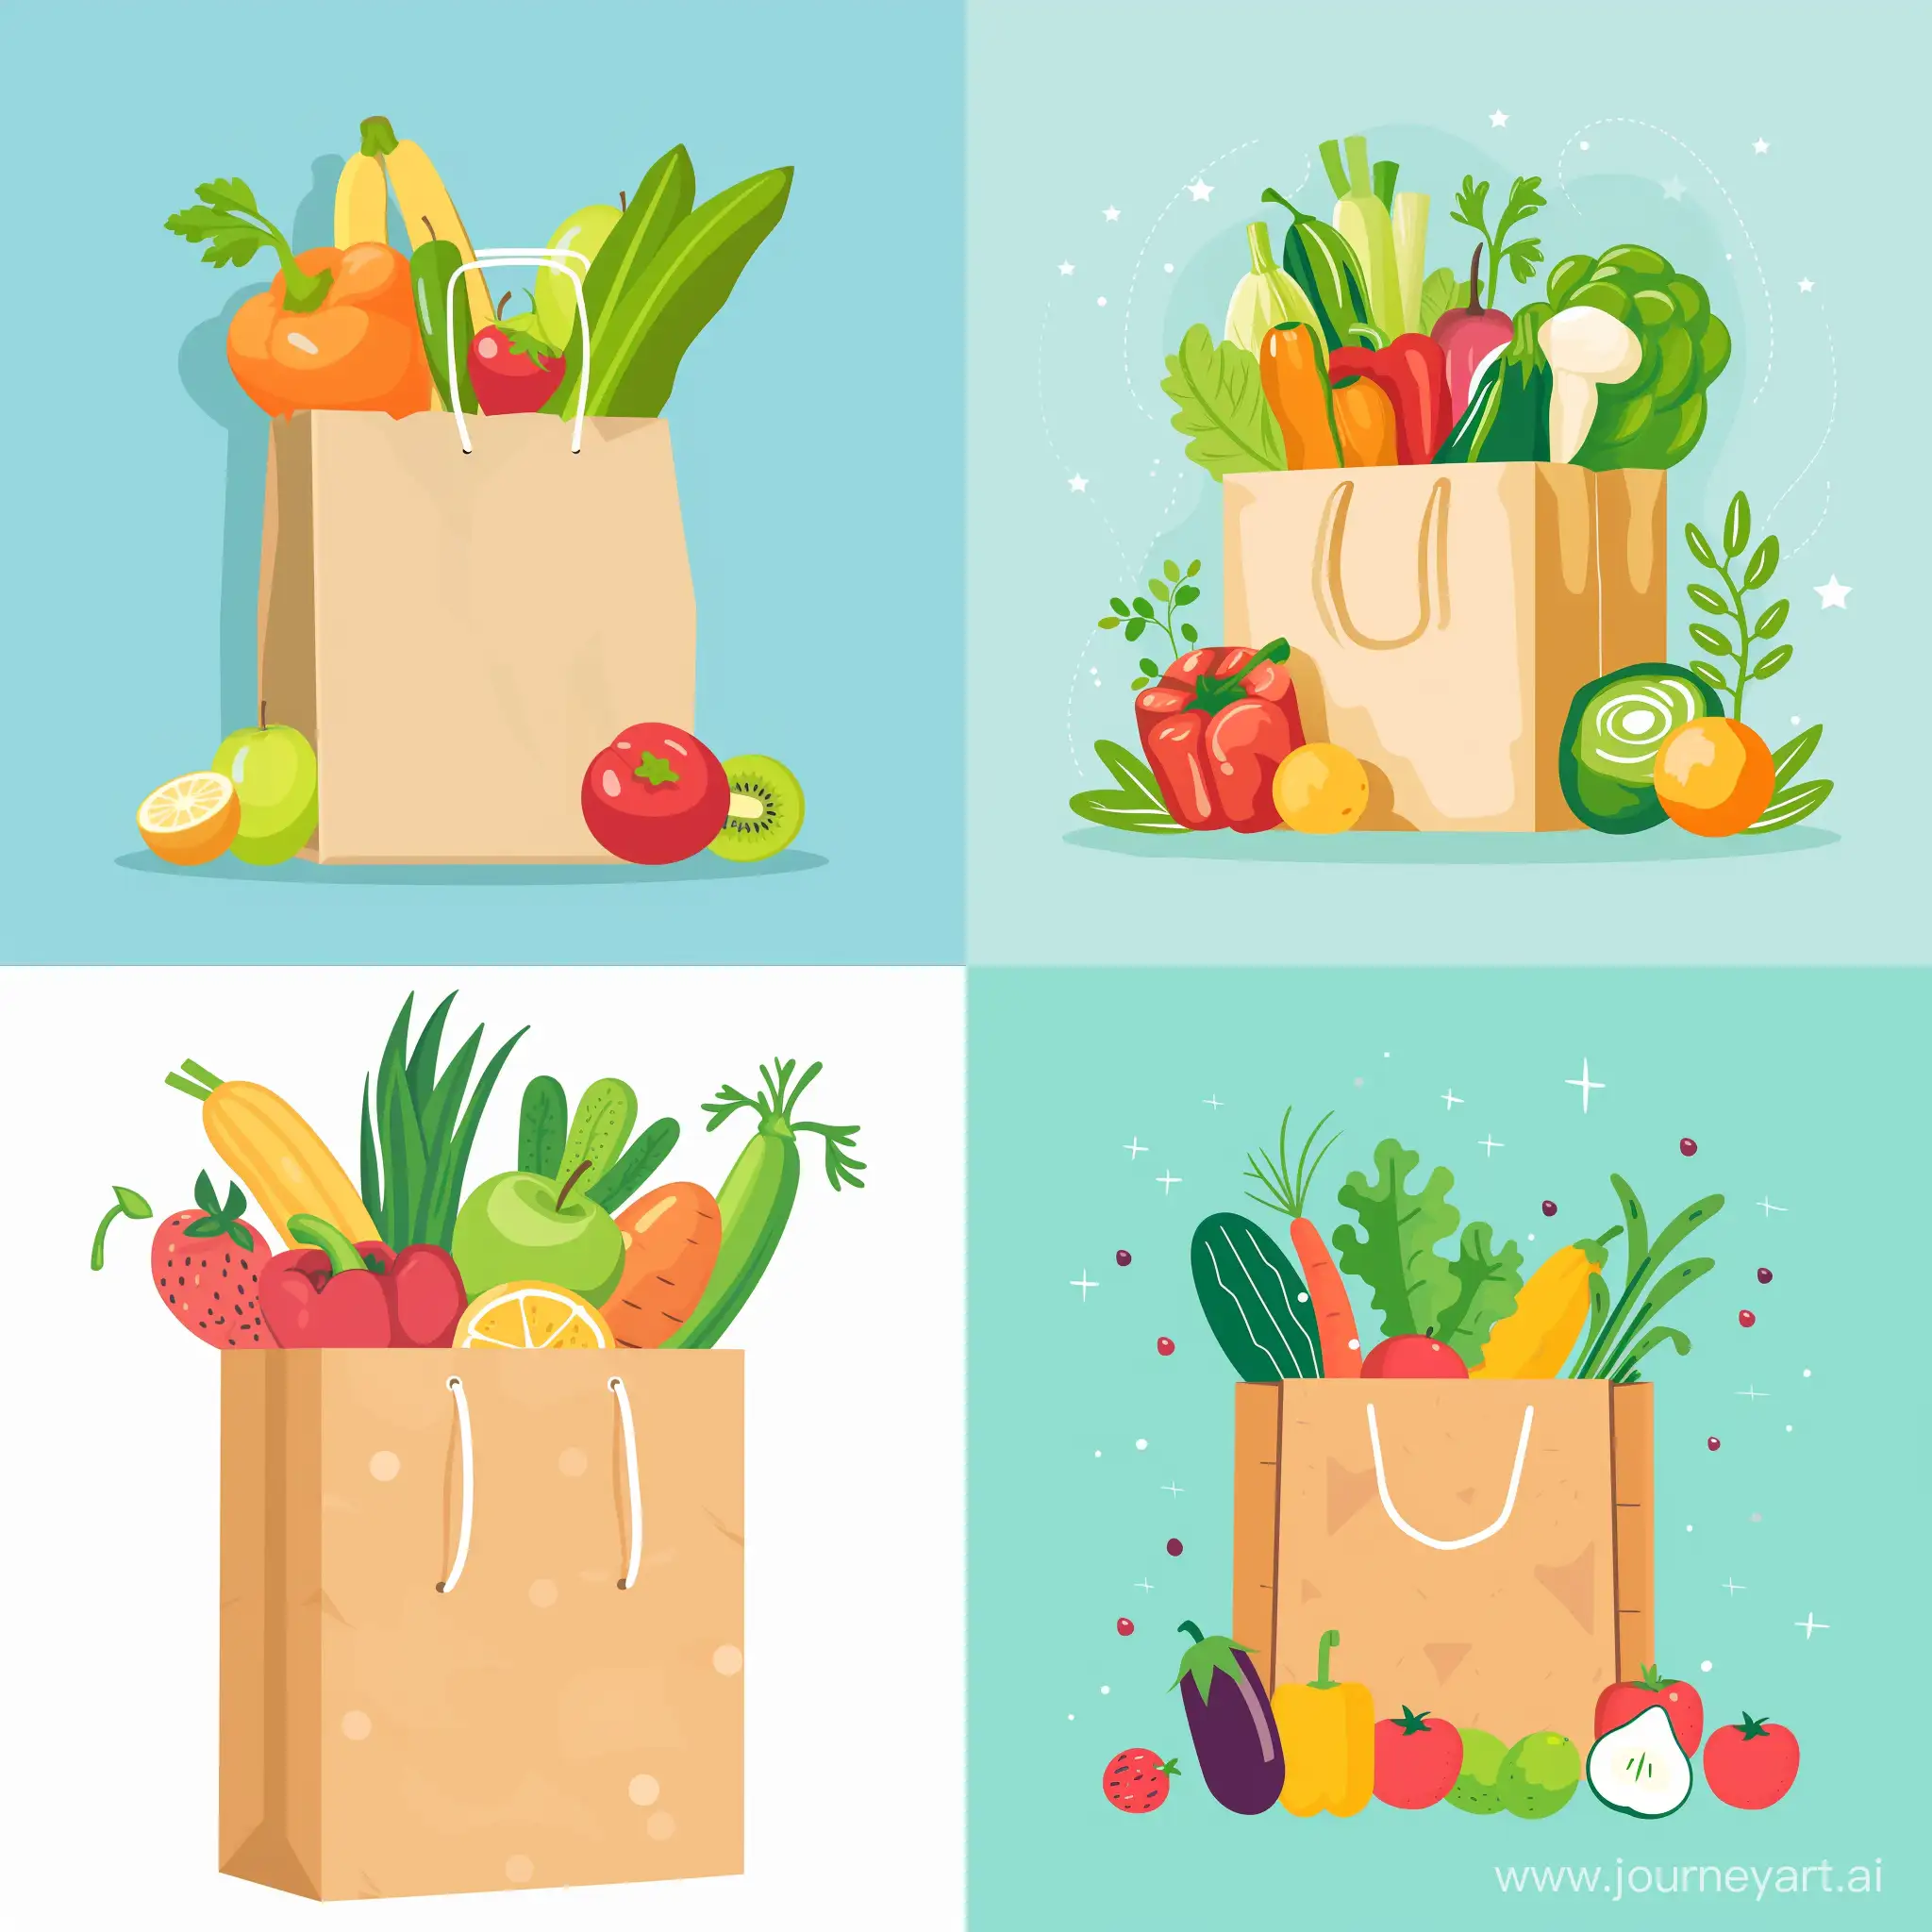 Fresh-Vegetables-and-Fruits-in-EcoFriendly-Paper-Bag-Vibrant-Flat-Style-Image